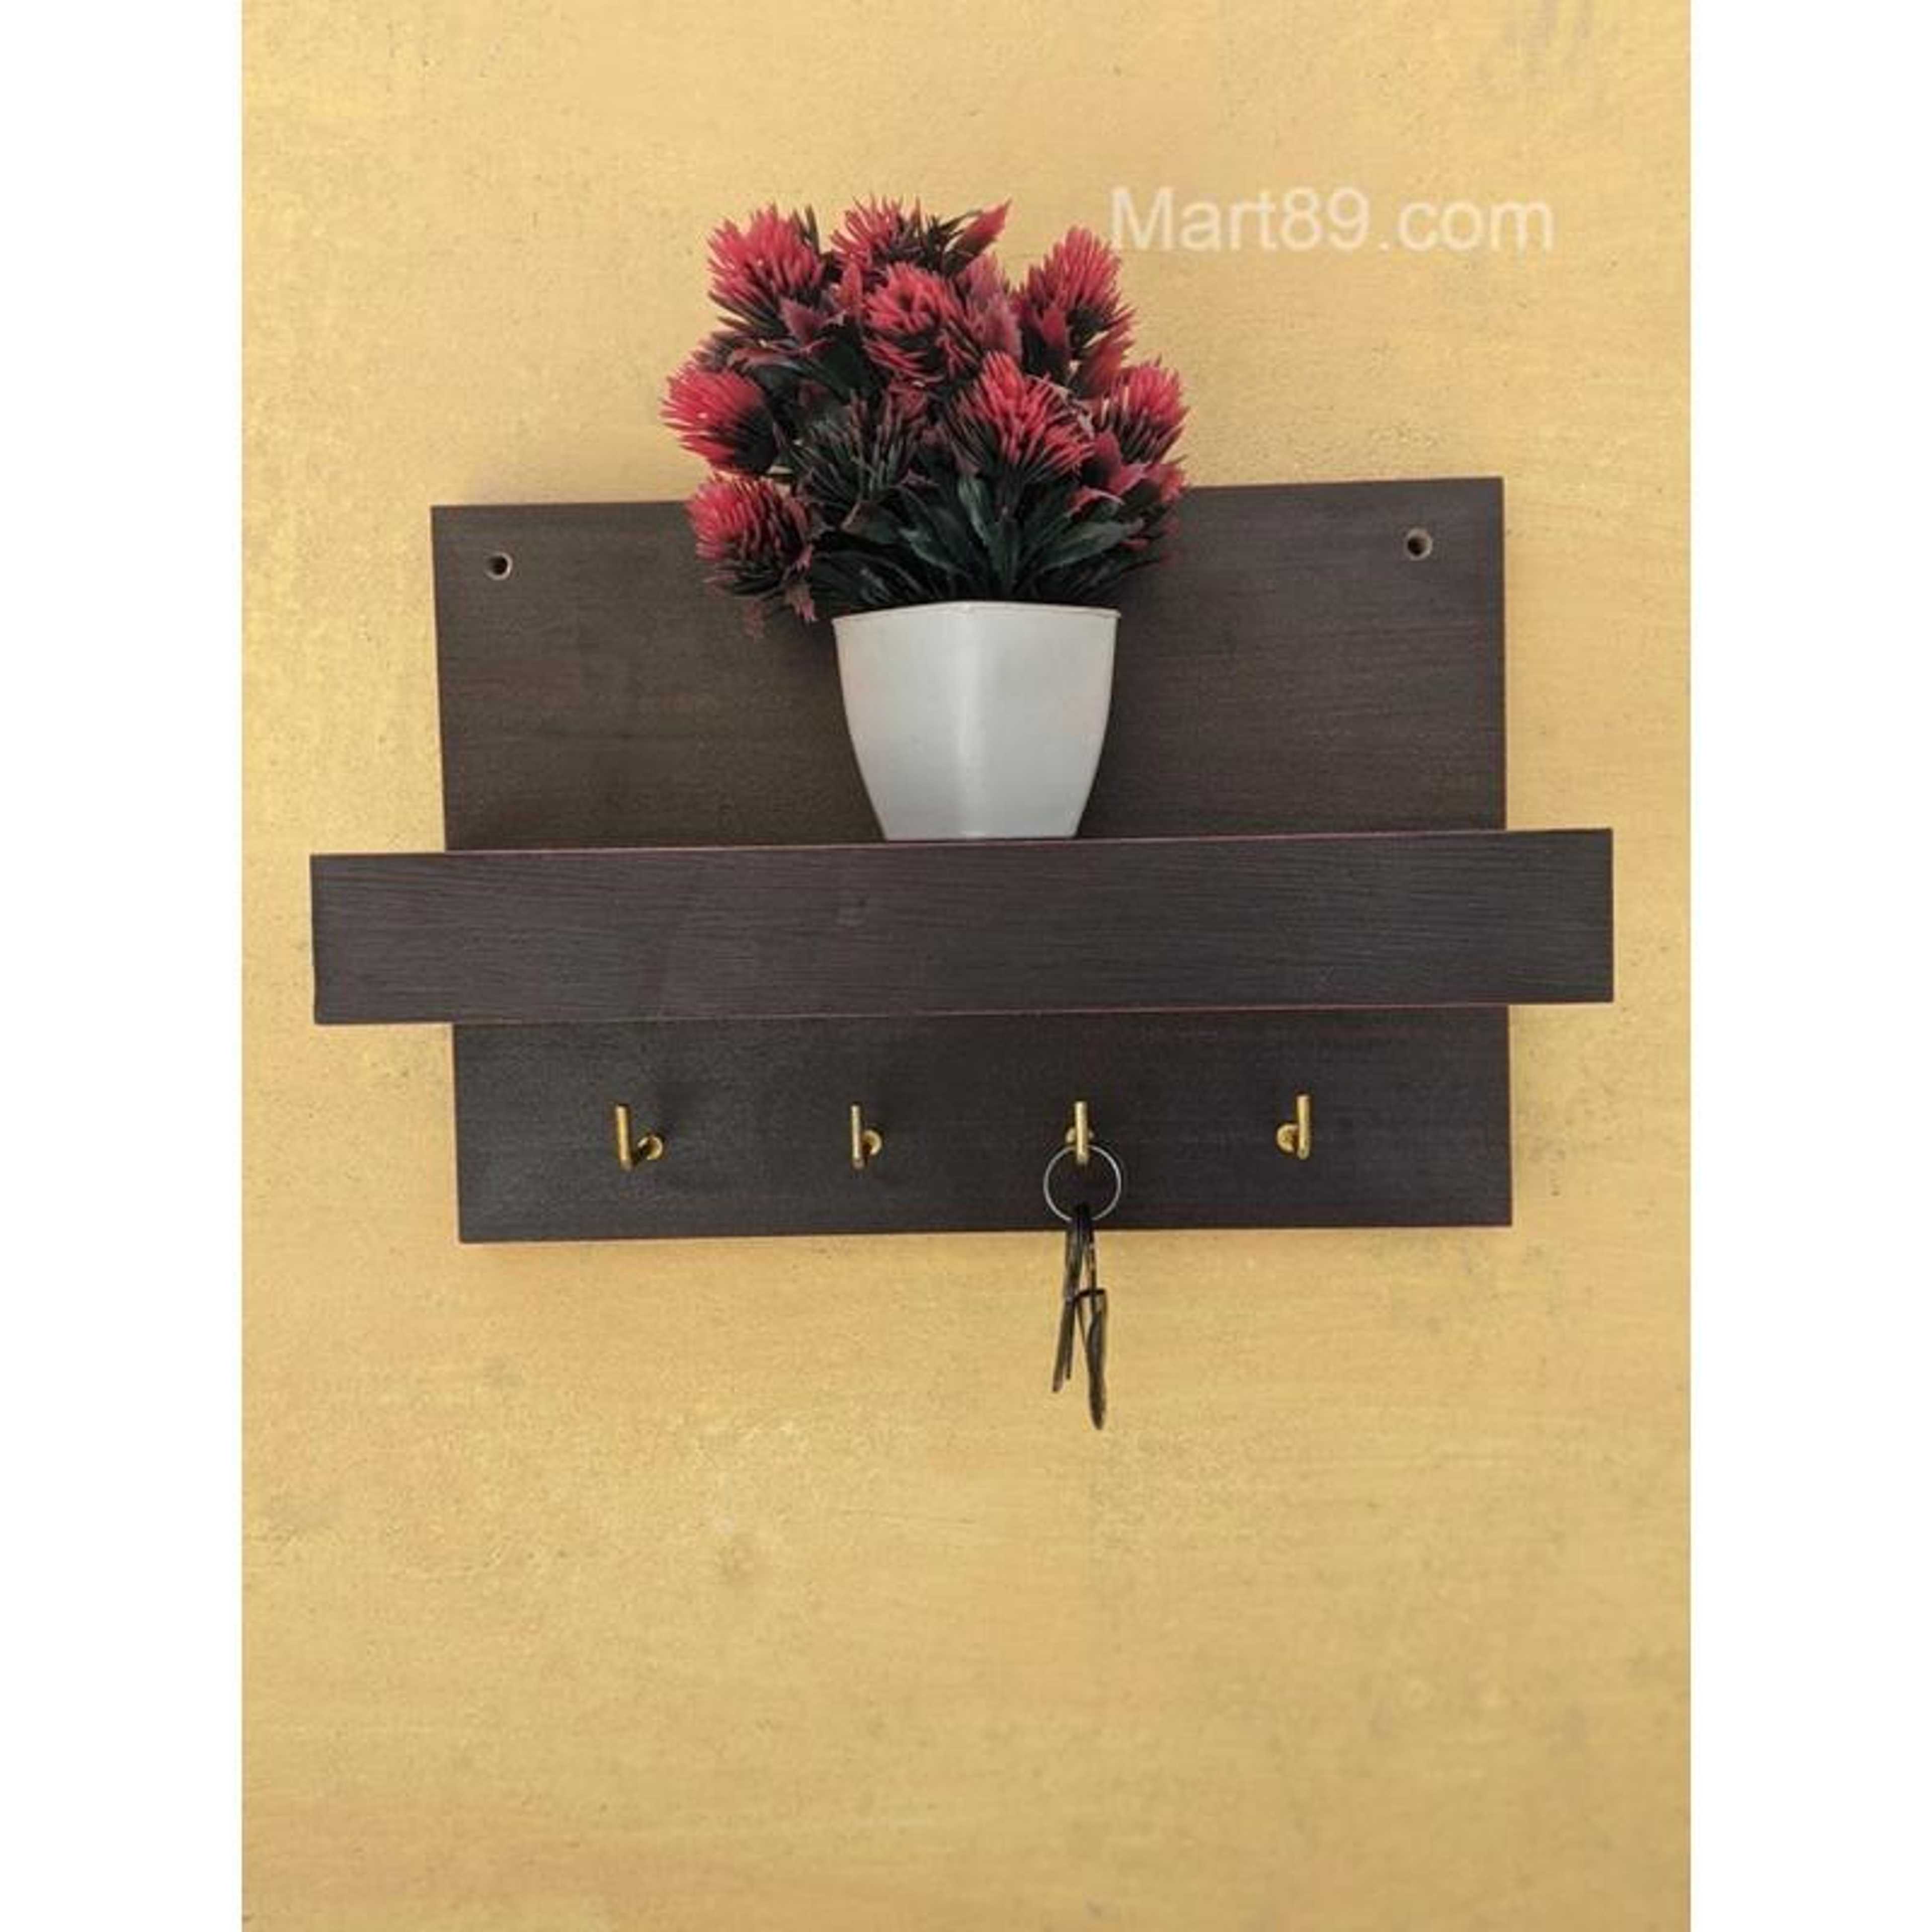 Key Holder Key rack Stand for Wall Office & Home Decorative Antique Design no 03 Official Mart89 Branded Product